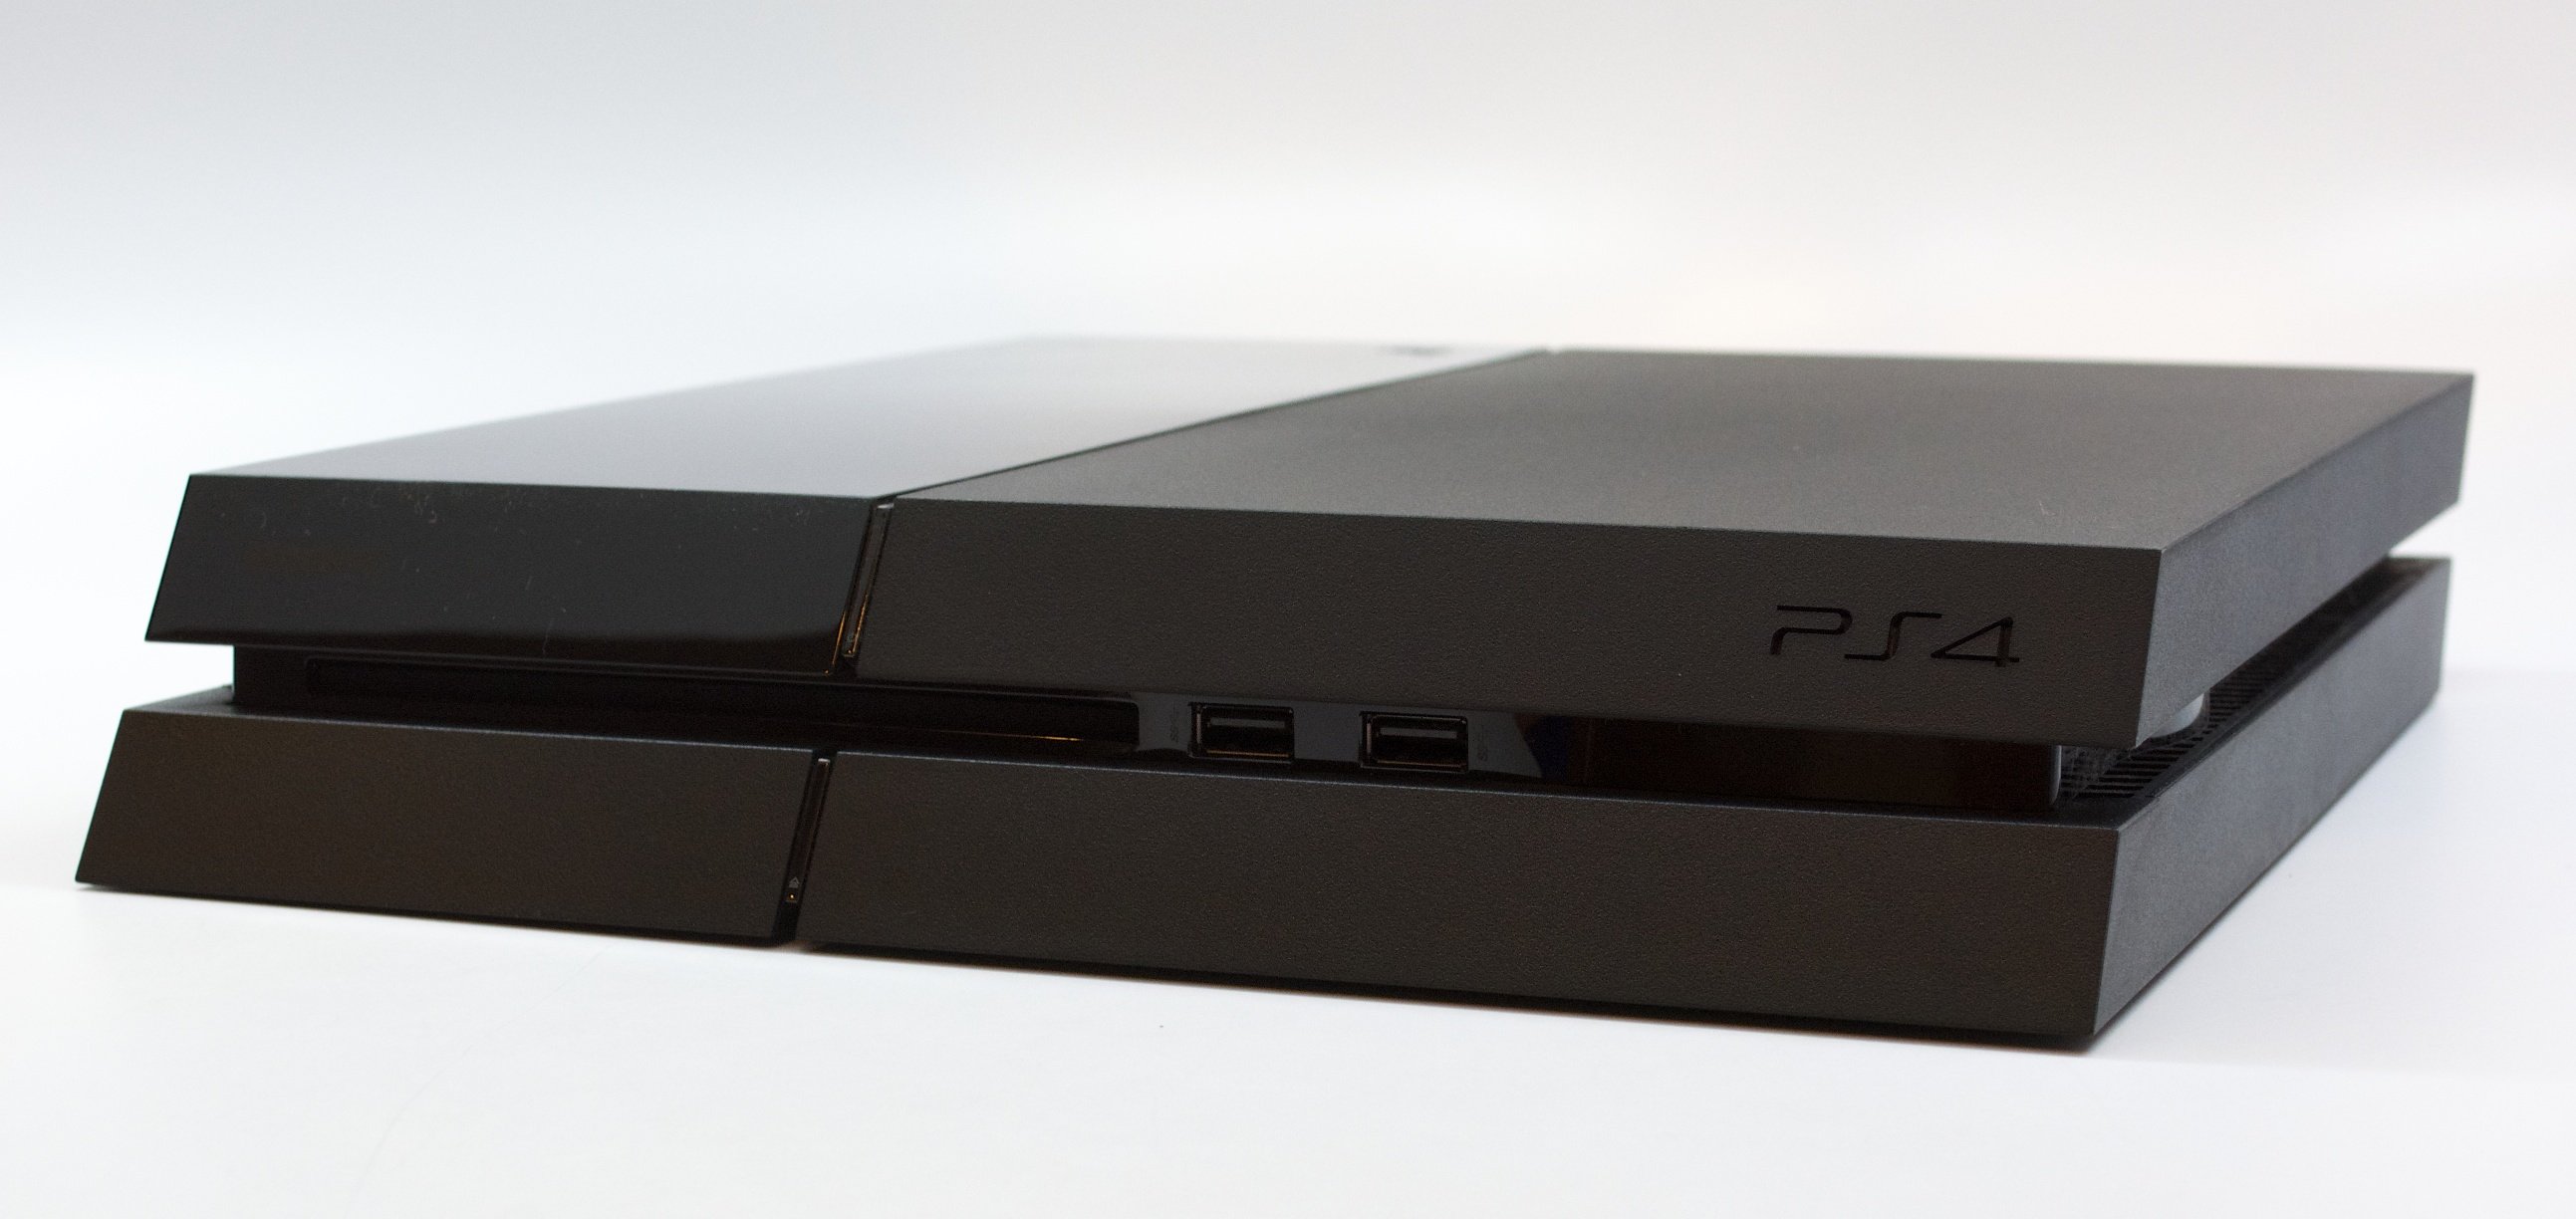 The PS4 is enough to tempt an Xbox 360 and Xbox One owner with a fast OS and focus on gaming that gets me playing fast.